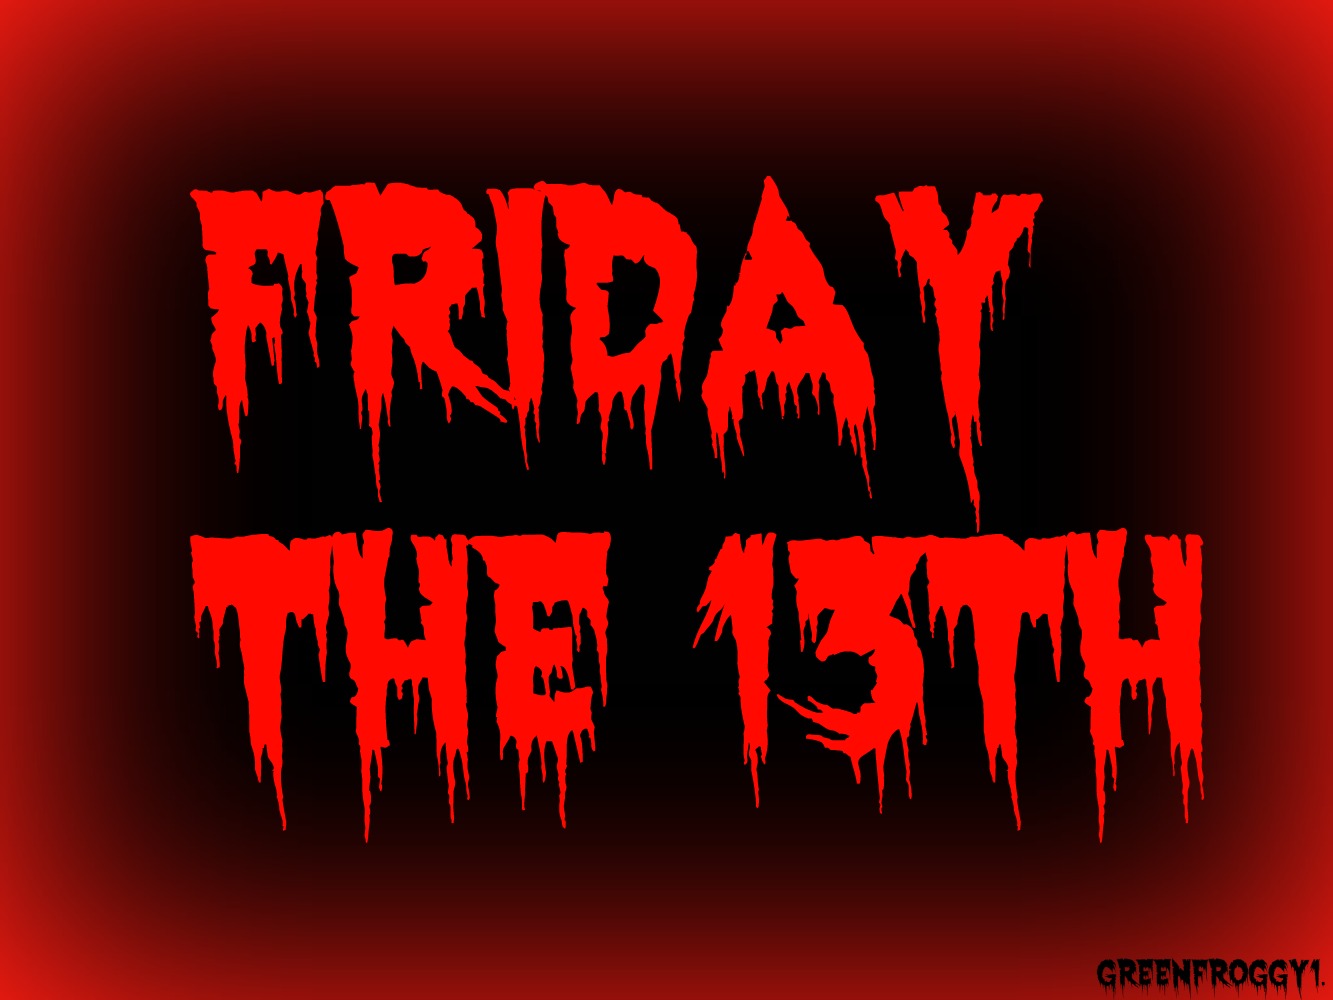 FRIDAY THE 13TH by GREENFROGGY1